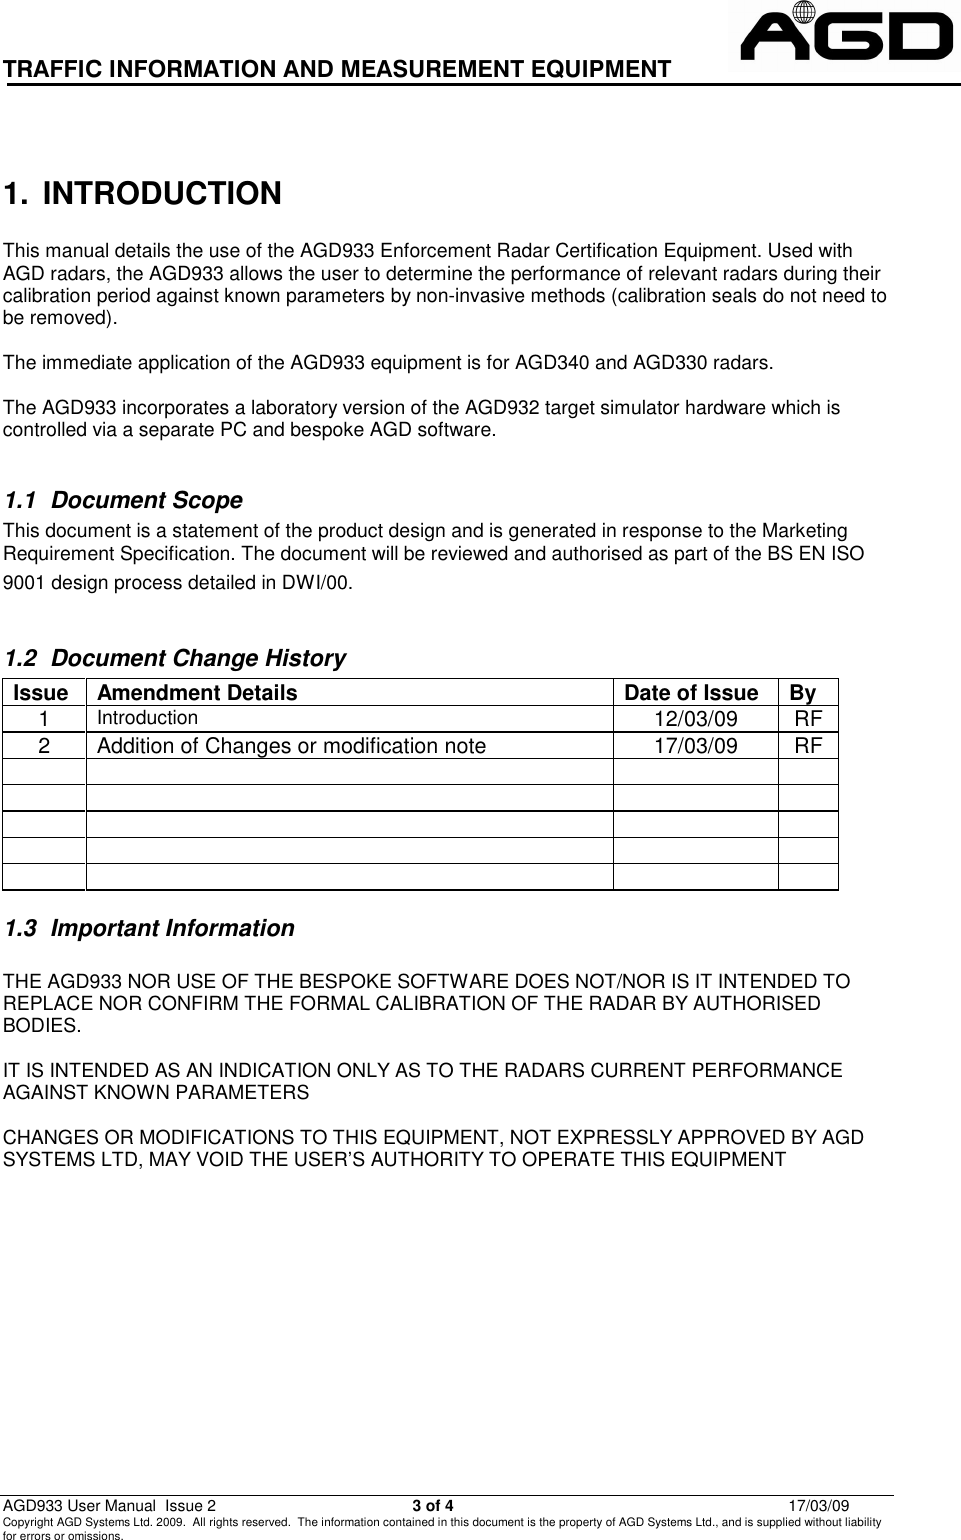 TRAFFIC INFORMATION AND MEASUREMENT EQUIPMENT                                                          AGD933 User Manual  Issue 2  3 of 4  17/03/09 Copyright AGD Systems Ltd. 2009.  All rights reserved.  The information contained in this document is the property of AGD Systems Ltd., and is supplied without liability for errors or omissions.                                                           1.  INTRODUCTION  This manual details the use of the AGD933 Enforcement Radar Certification Equipment. Used with AGD radars, the AGD933 allows the user to determine the performance of relevant radars during their calibration period against known parameters by non-invasive methods (calibration seals do not need to be removed).  The immediate application of the AGD933 equipment is for AGD340 and AGD330 radars.  The AGD933 incorporates a laboratory version of the AGD932 target simulator hardware which is controlled via a separate PC and bespoke AGD software.  1.1  Document Scope This document is a statement of the product design and is generated in response to the Marketing Requirement Specification. The document will be reviewed and authorised as part of the BS EN ISO 9001 design process detailed in DWI/00.        1.2  Document Change History Issue  Amendment Details  Date of Issue  By 1 Introduction  12/03/09  RF 2 Addition of Changes or modification note 17/03/09 RF                                 1.3  Important Information  THE AGD933 NOR USE OF THE BESPOKE SOFTWARE DOES NOT/NOR IS IT INTENDED TO REPLACE NOR CONFIRM THE FORMAL CALIBRATION OF THE RADAR BY AUTHORISED BODIES.  IT IS INTENDED AS AN INDICATION ONLY AS TO THE RADARS CURRENT PERFORMANCE AGAINST KNOWN PARAMETERS  CHANGES OR MODIFICATIONS TO THIS EQUIPMENT, NOT EXPRESSLY APPROVED BY AGD SYSTEMS LTD, MAY VOID THE USER’S AUTHORITY TO OPERATE THIS EQUIPMENT 